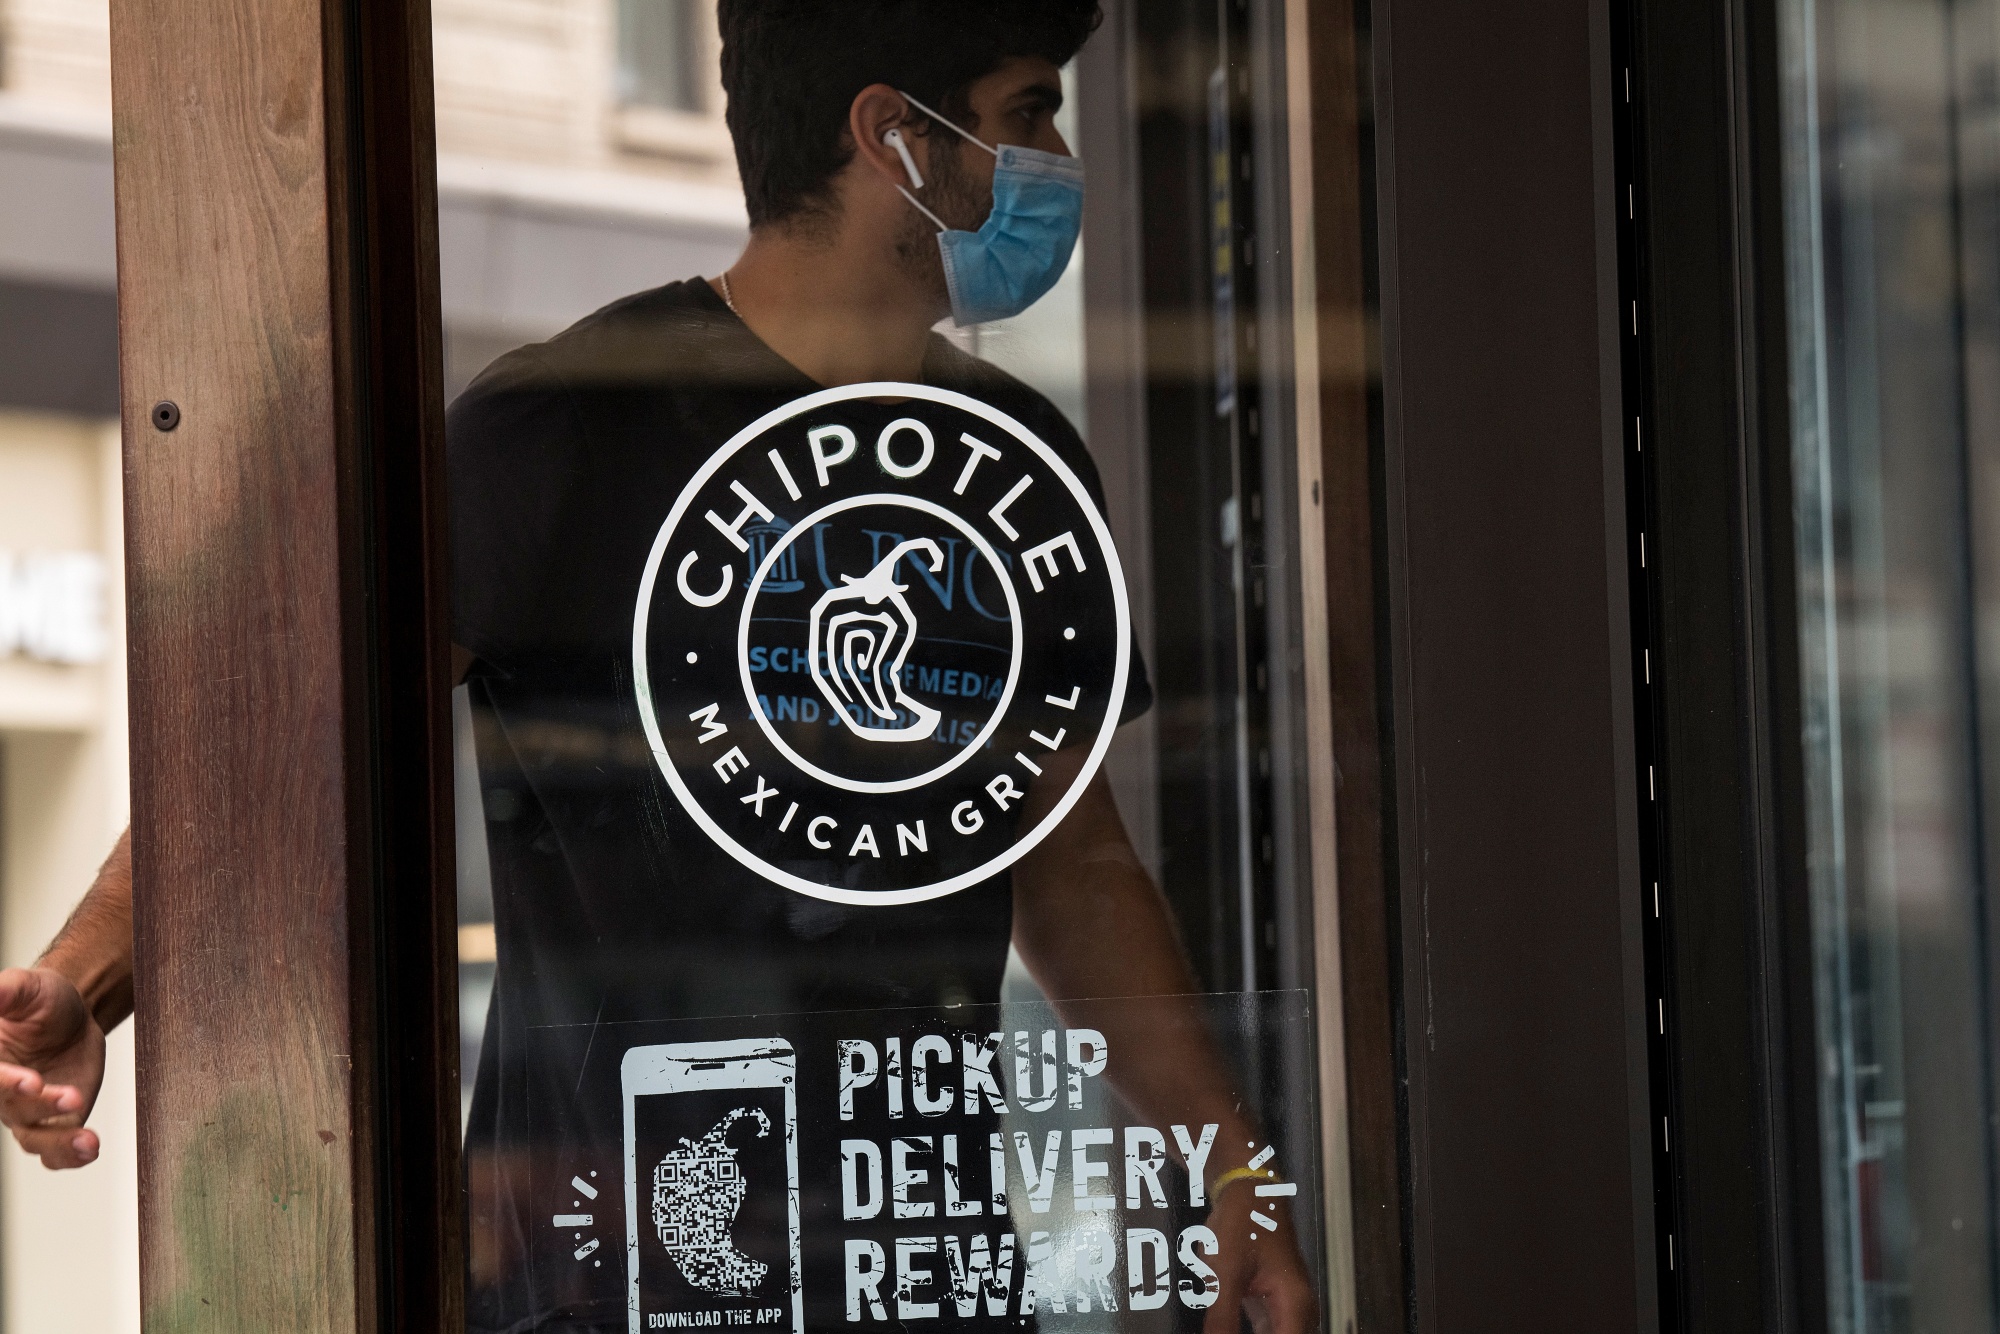 Chipotle Locations Ahead Of Earnings Figures